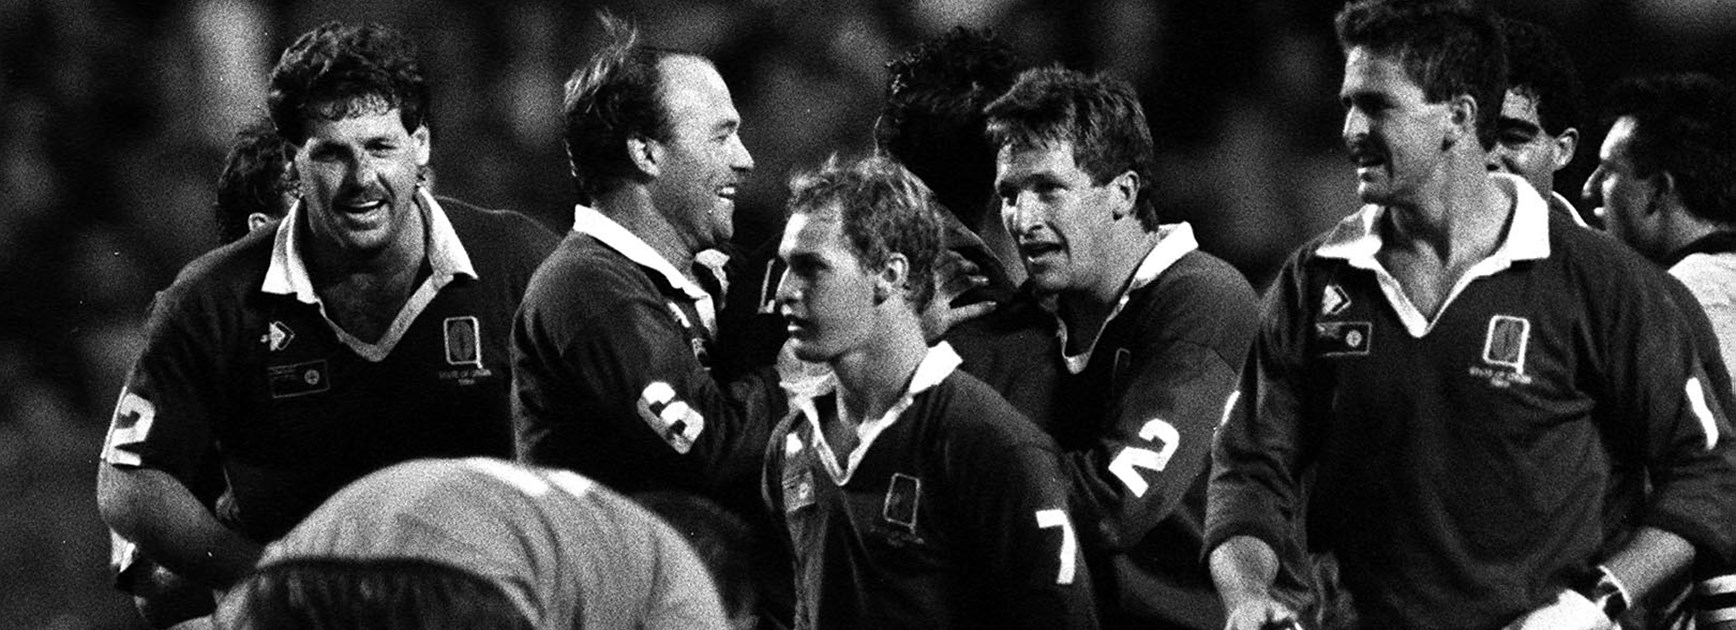 All the King's men: Why '89 Maroons are Origin's greatest team